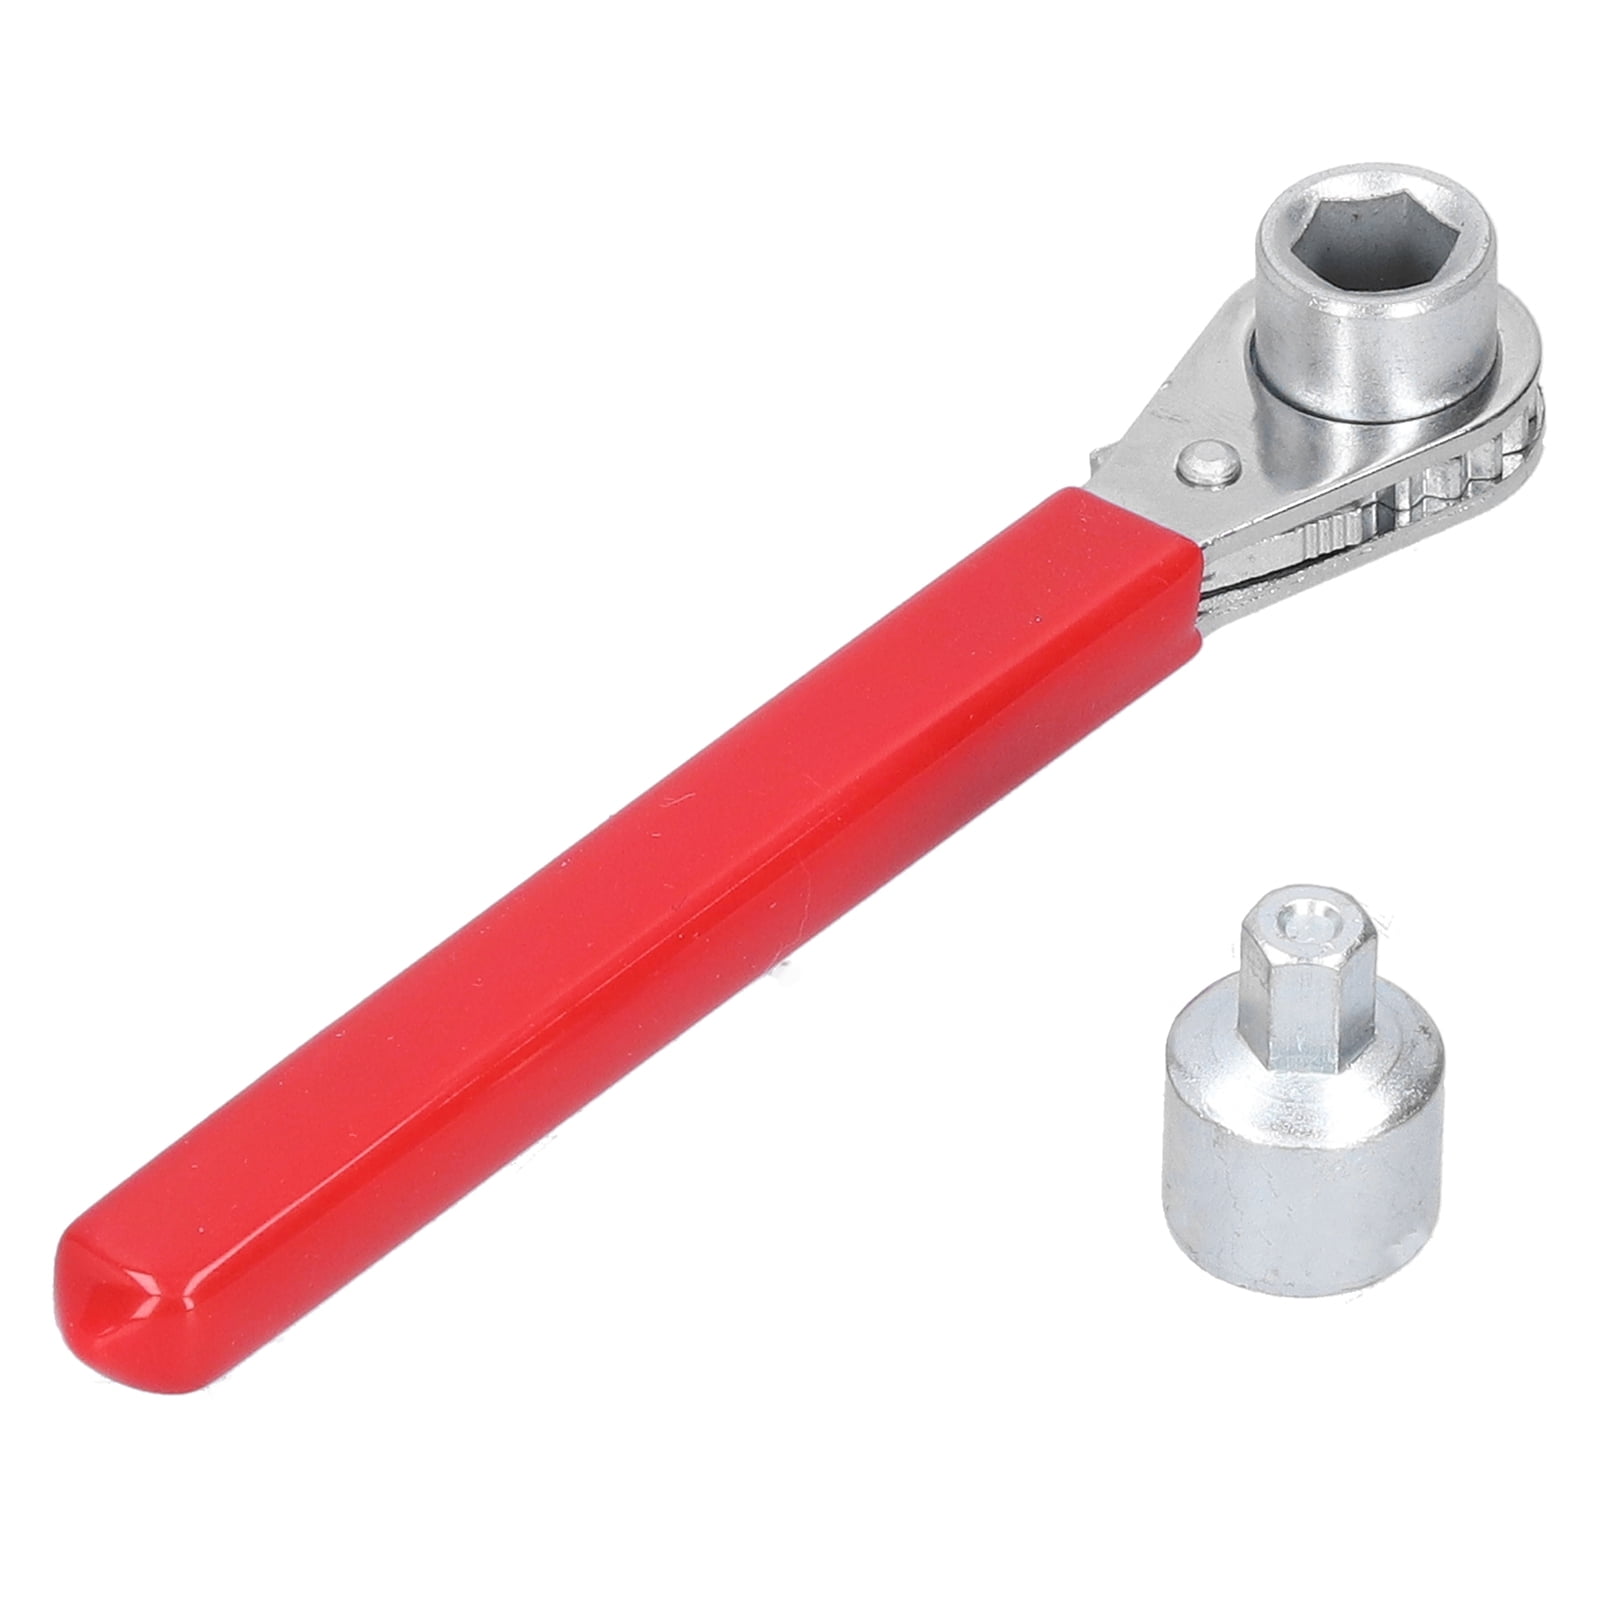 Details about   WHOLESALE LOT OF 10 FJC 46326 10mm Battery Terminal Ratchet Wrenches 